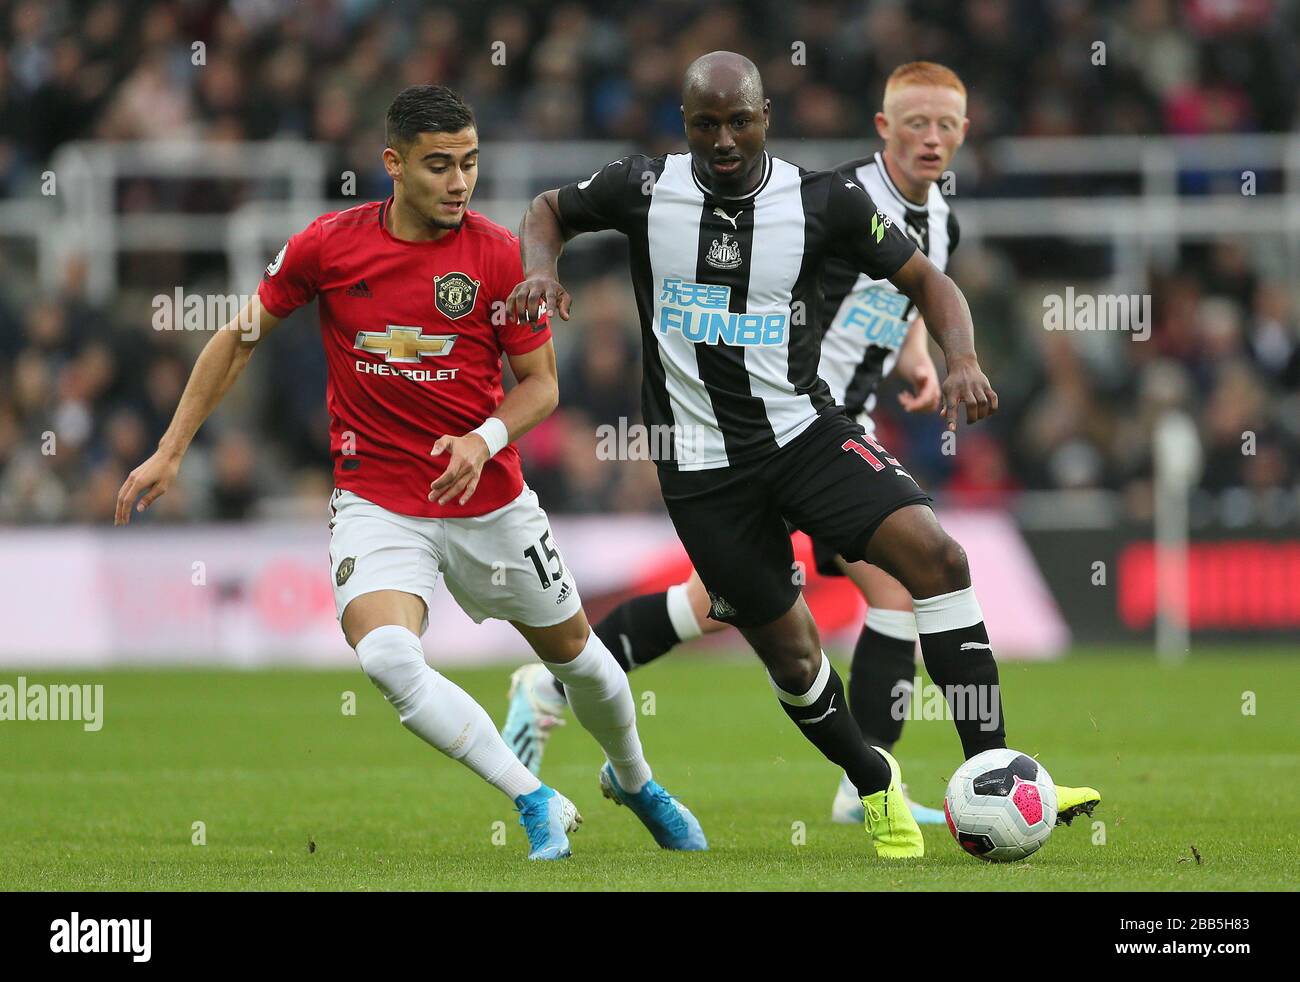 Manchester United's Andreas Pereira (left) and Newcastle United's Jetro Willems battle for the ball Stock Photo